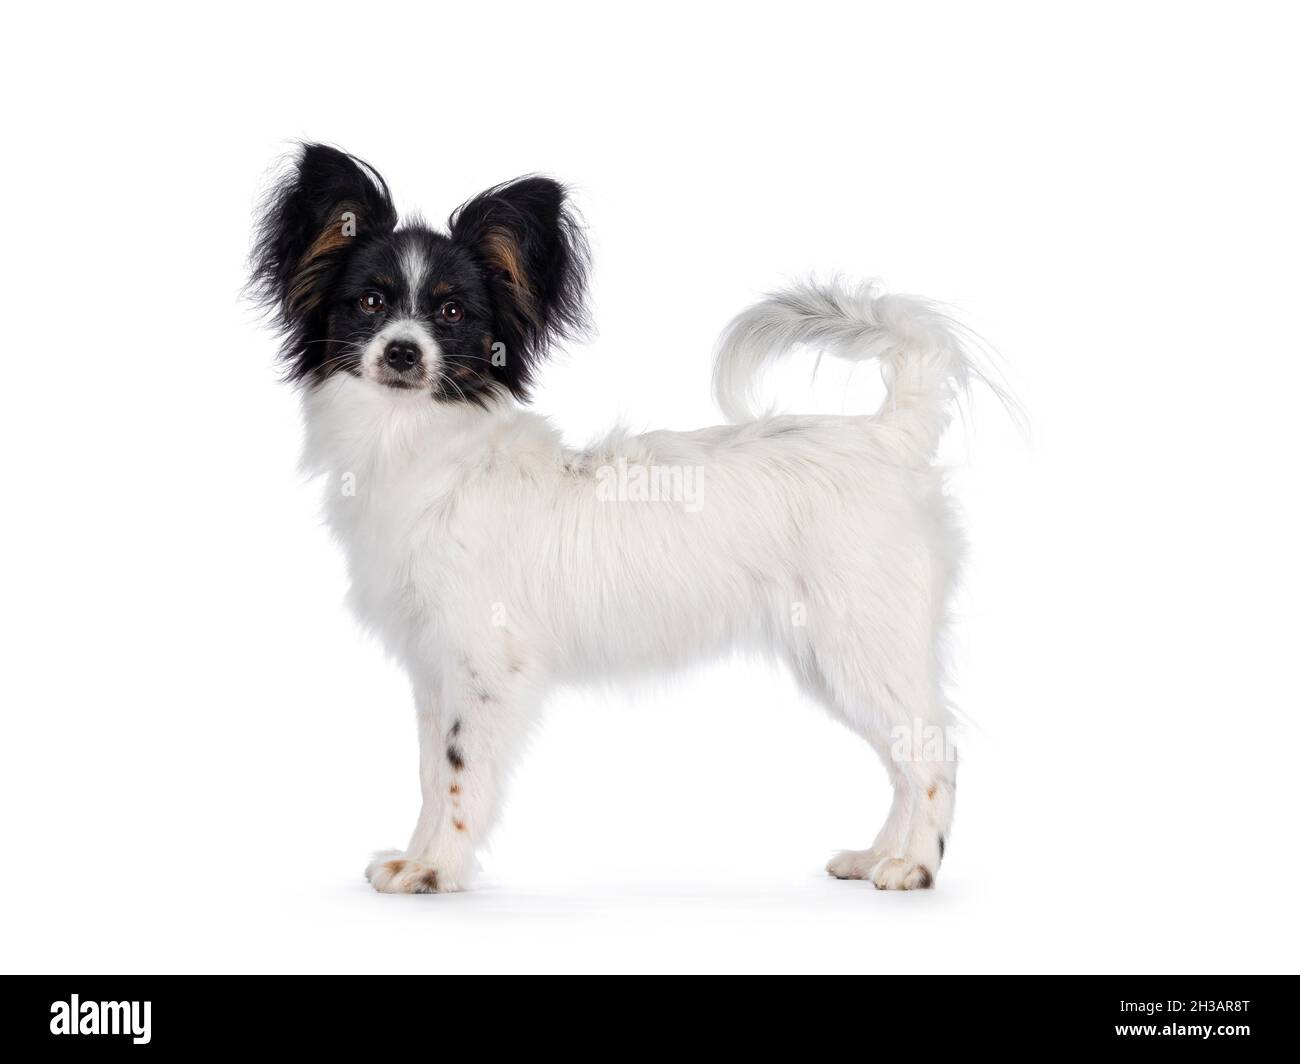 Excellent white black and tan Epagneul Nain Papillon dog puppy, standing side ways looking towards camera. isolated on white background. Stock Photo